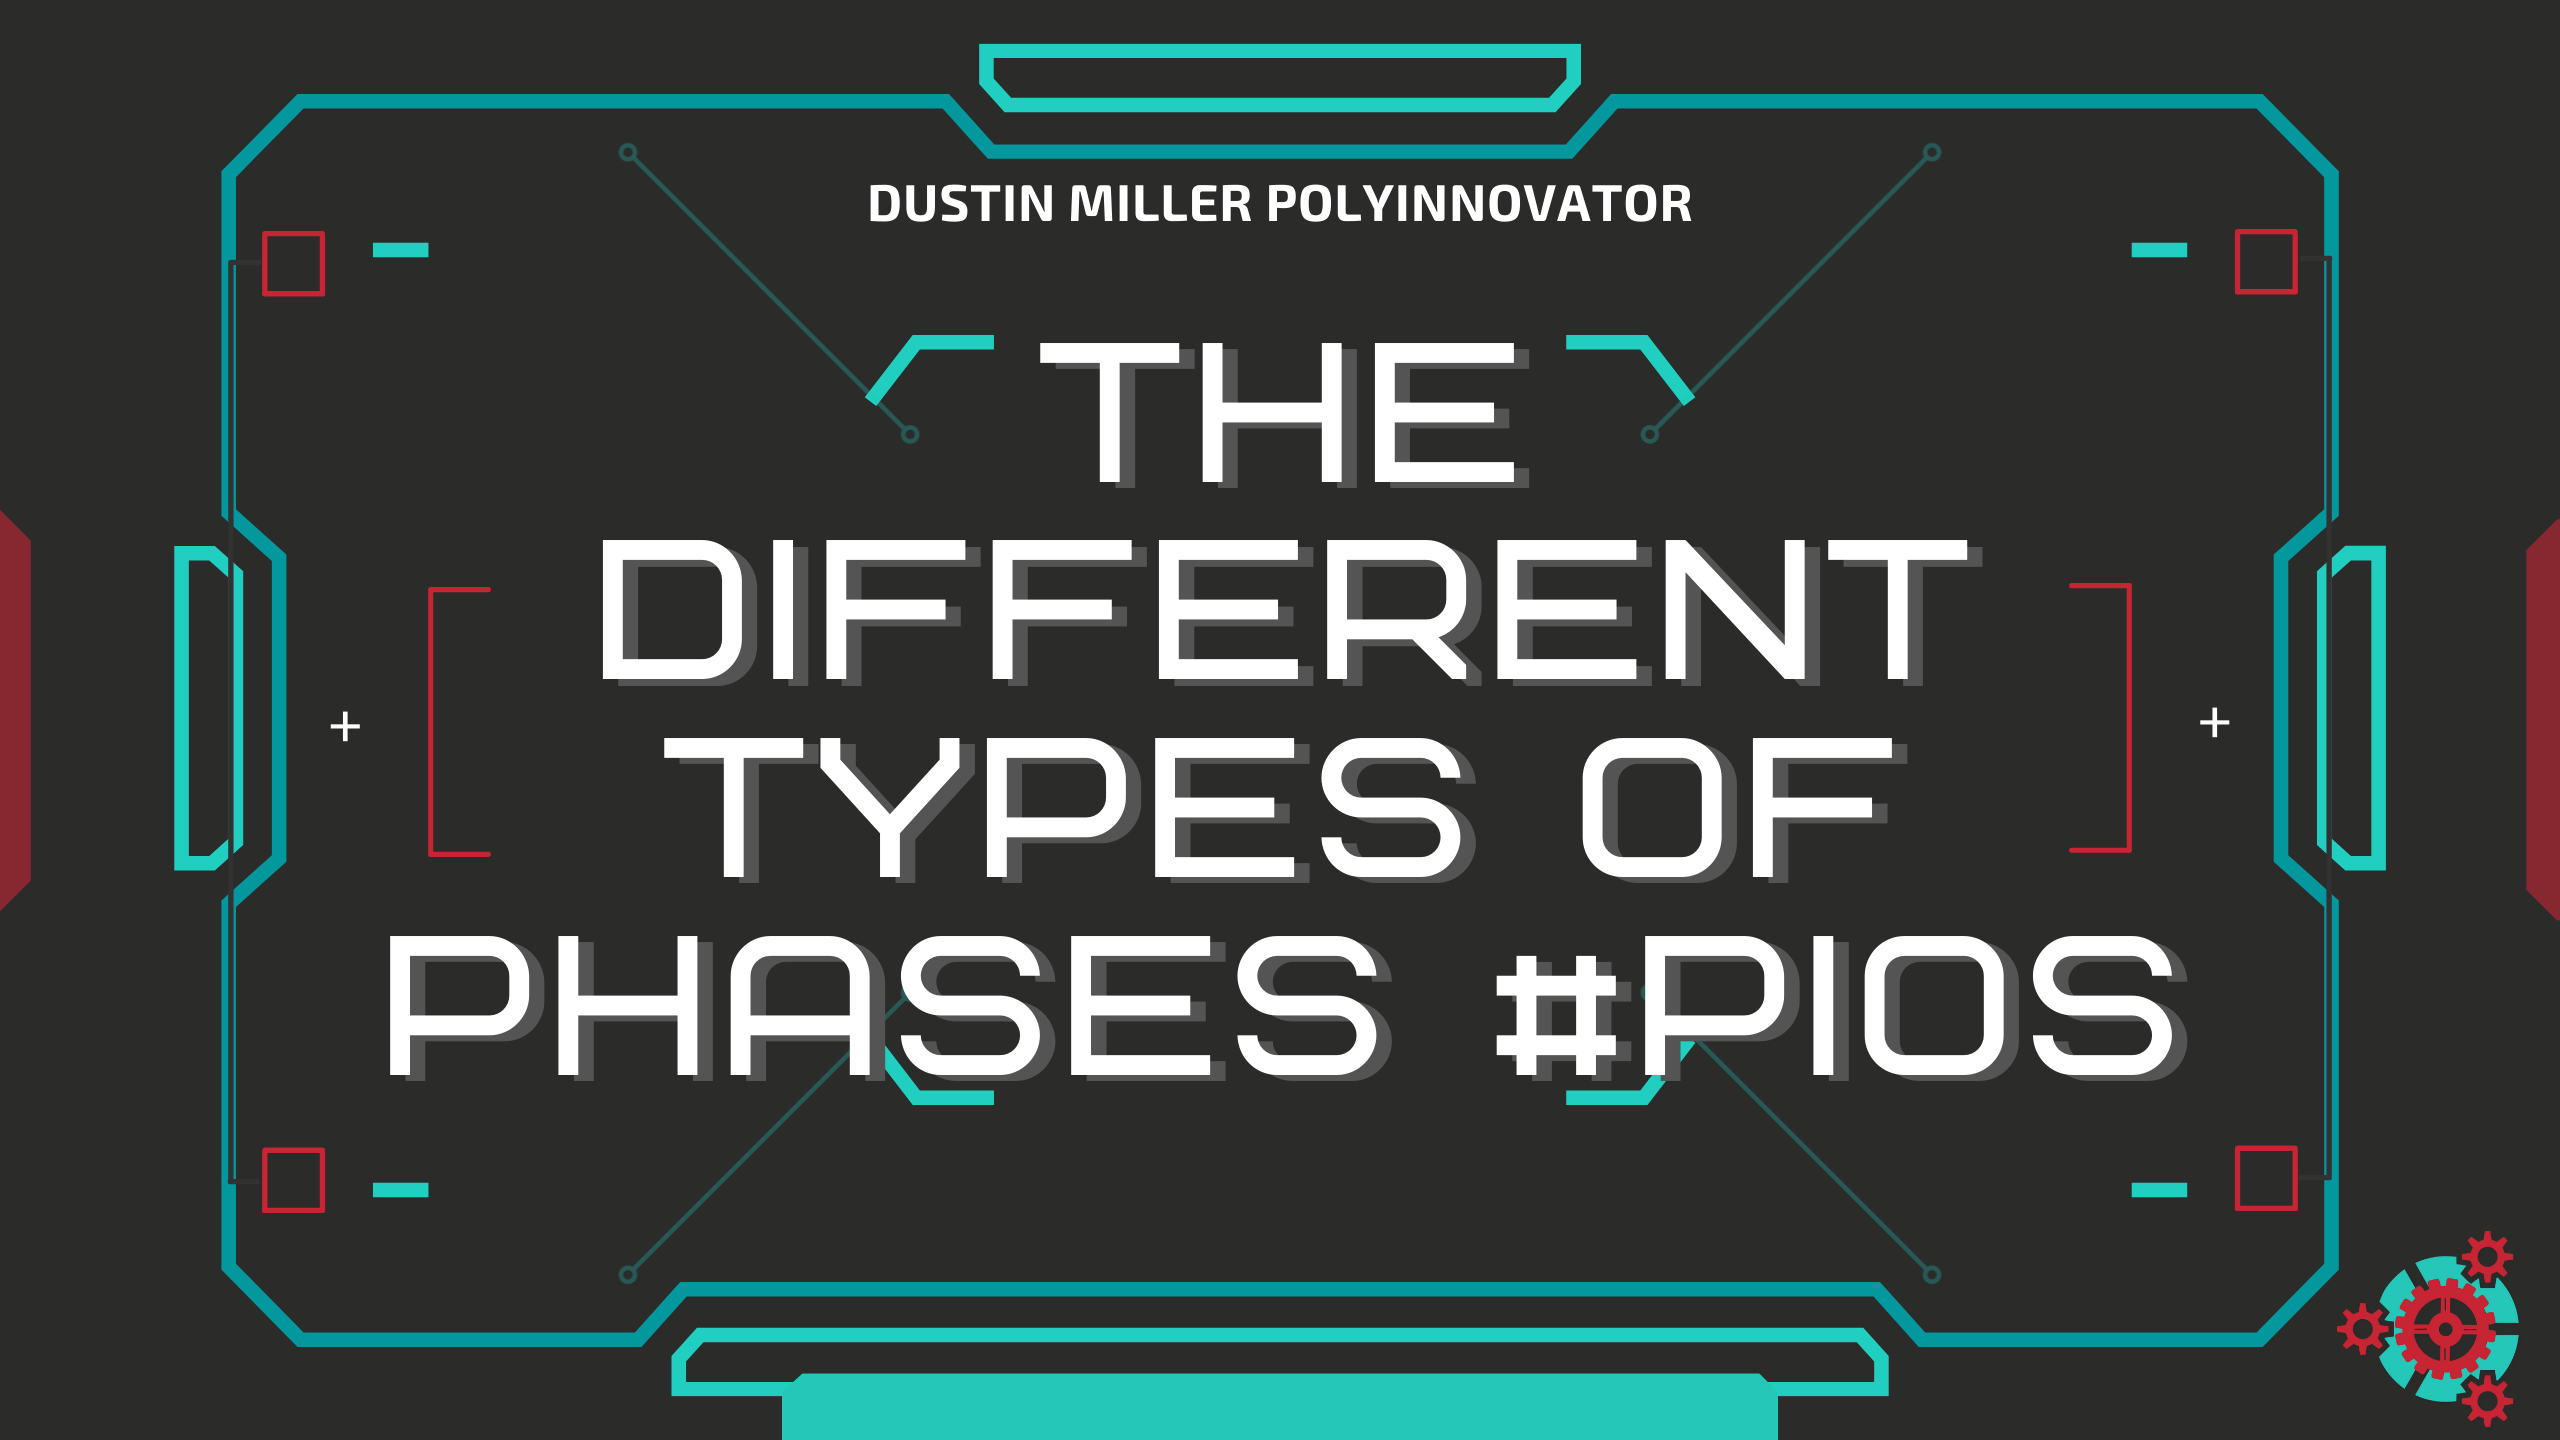 The Different Types of Phases #PIOS